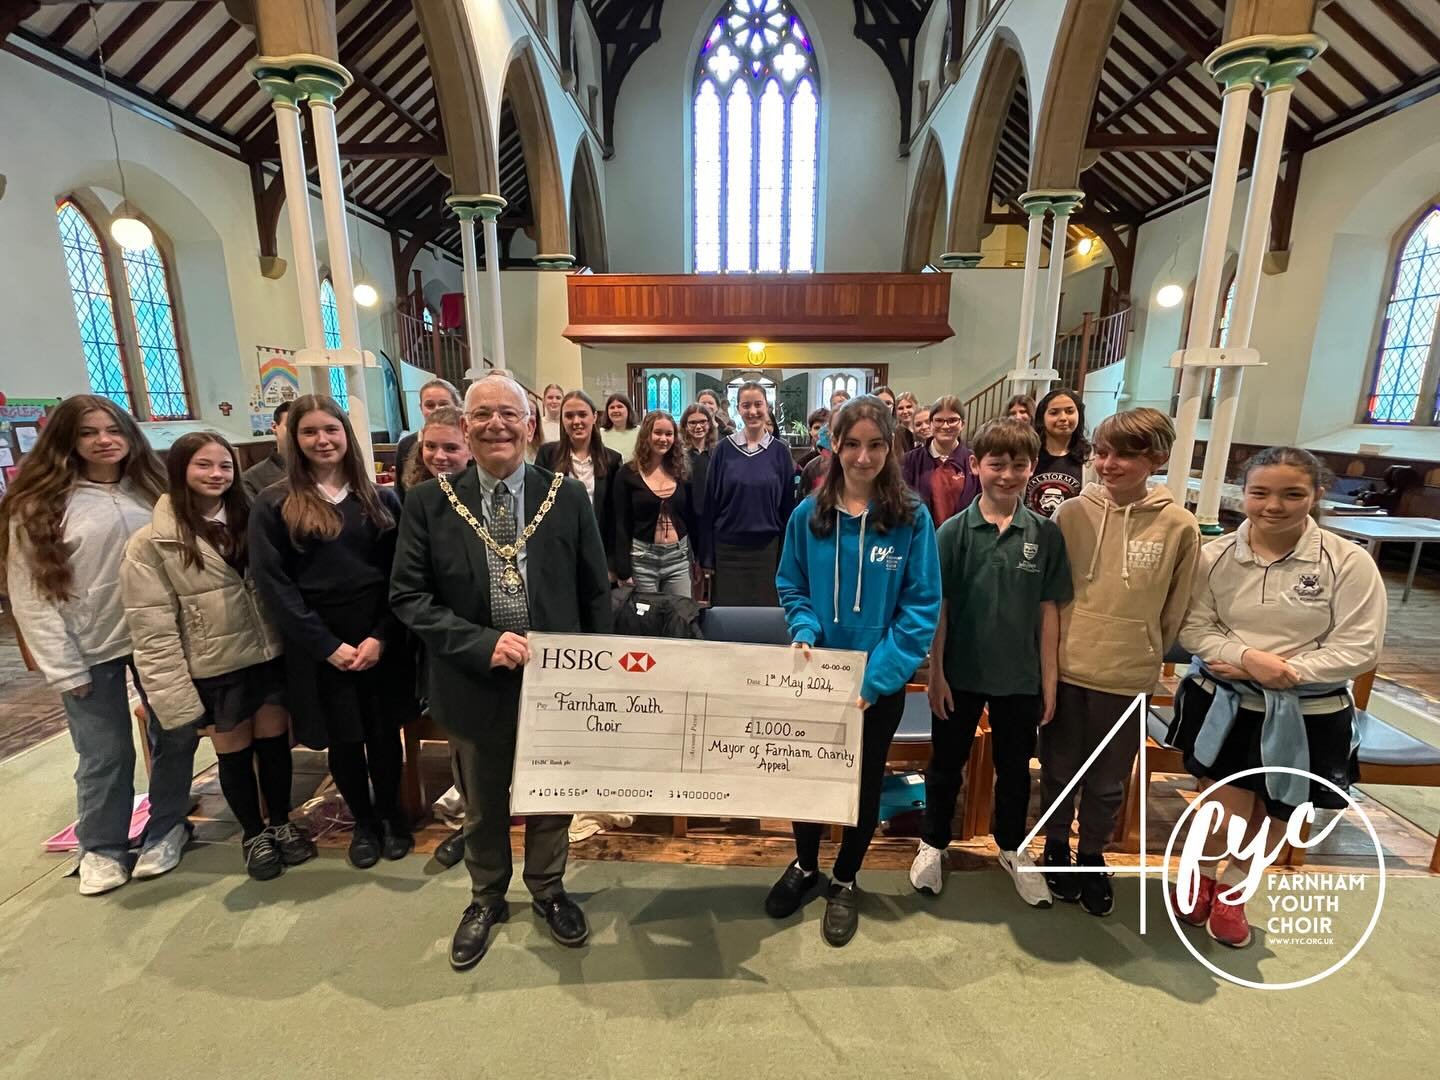 Our Senior Choir was delighted to welcome Farnham Mayor @allenearwaker and his big cheque to rehearsal last night. Huge thanks to Alan for this donation from the Mayor&rsquo;s fund. And we wish Alan well as he moves on from his mayoral role in May. W